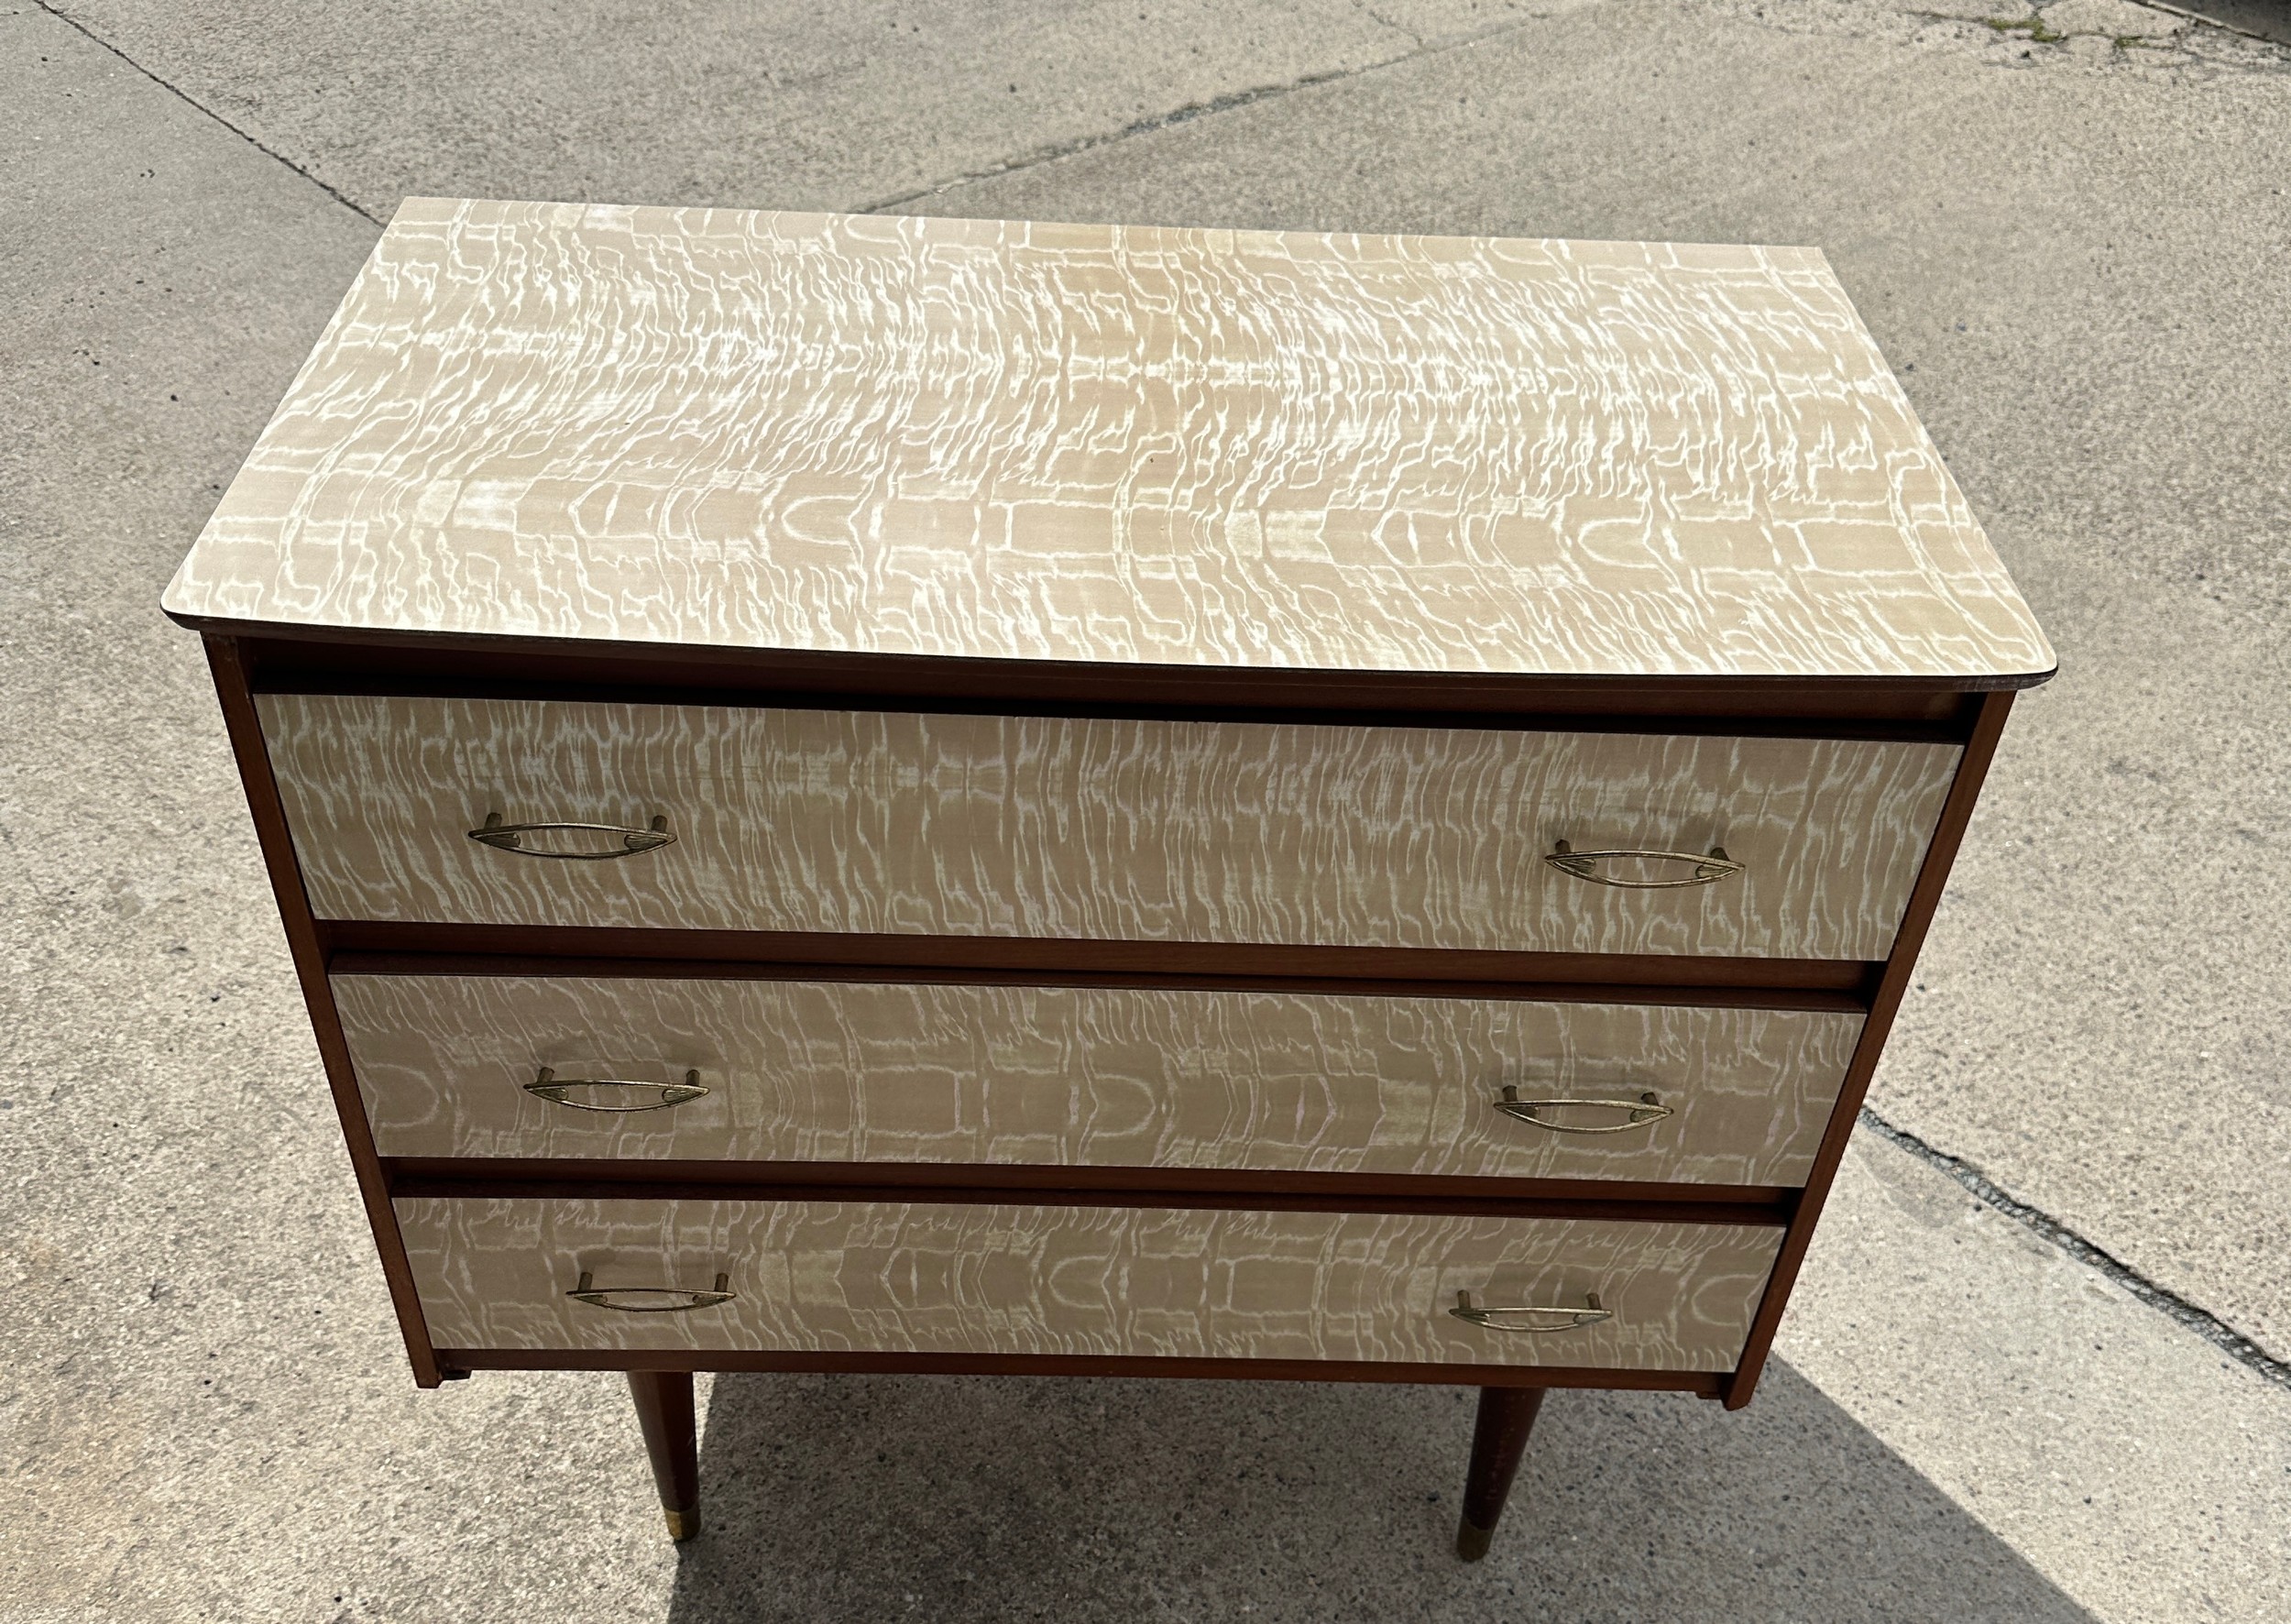 60's melamine three drawer chest of drawers measures approx 30 inches wide by 28 inches tall - Image 2 of 3